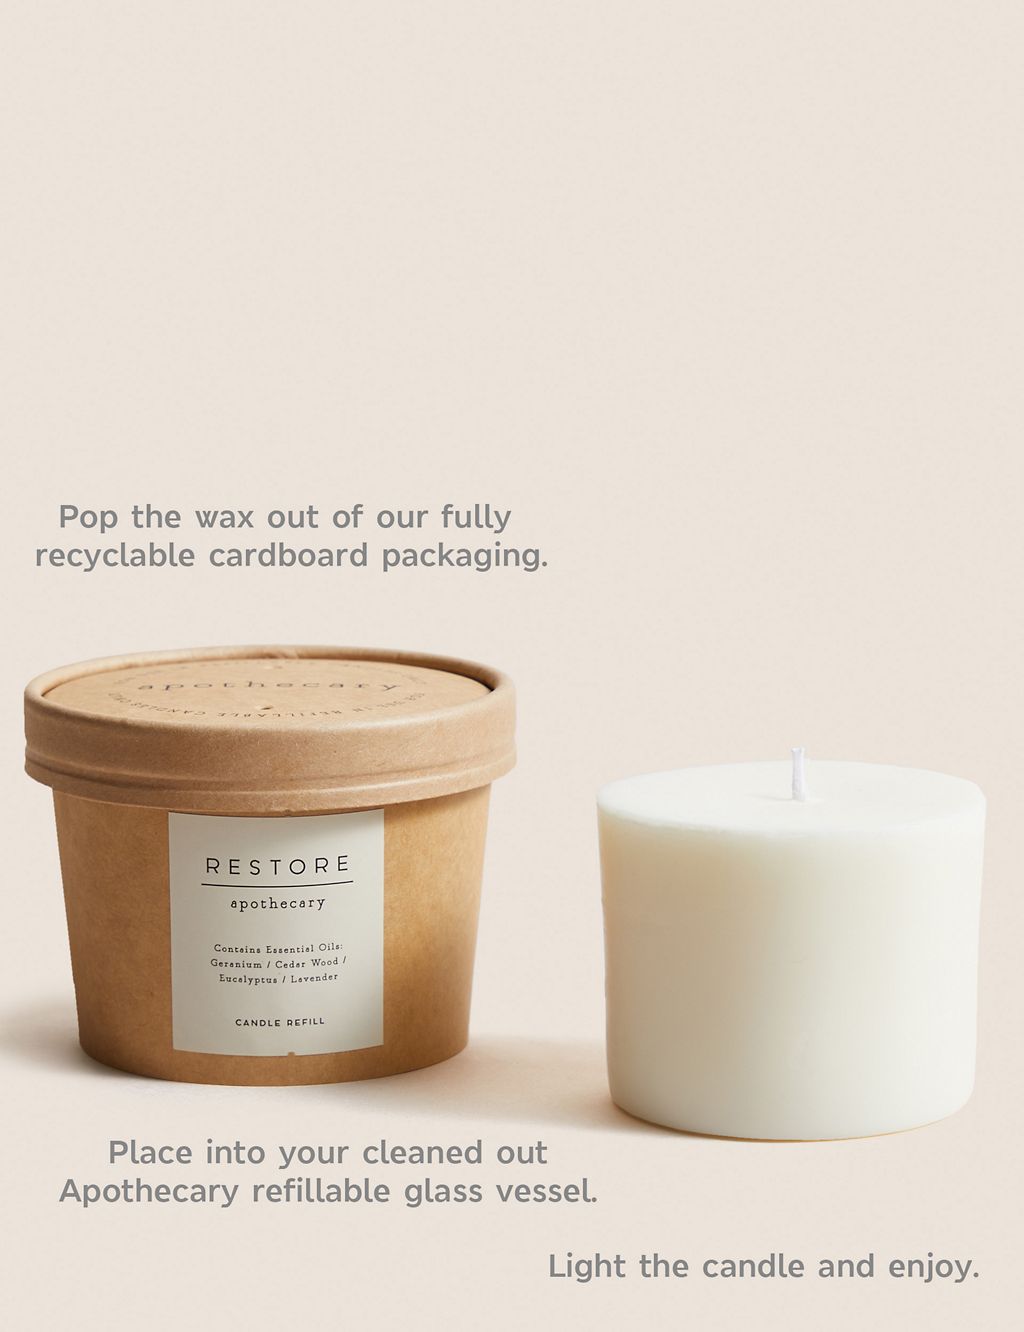 Calm Candle & Refill Set | Apothecary | M&S